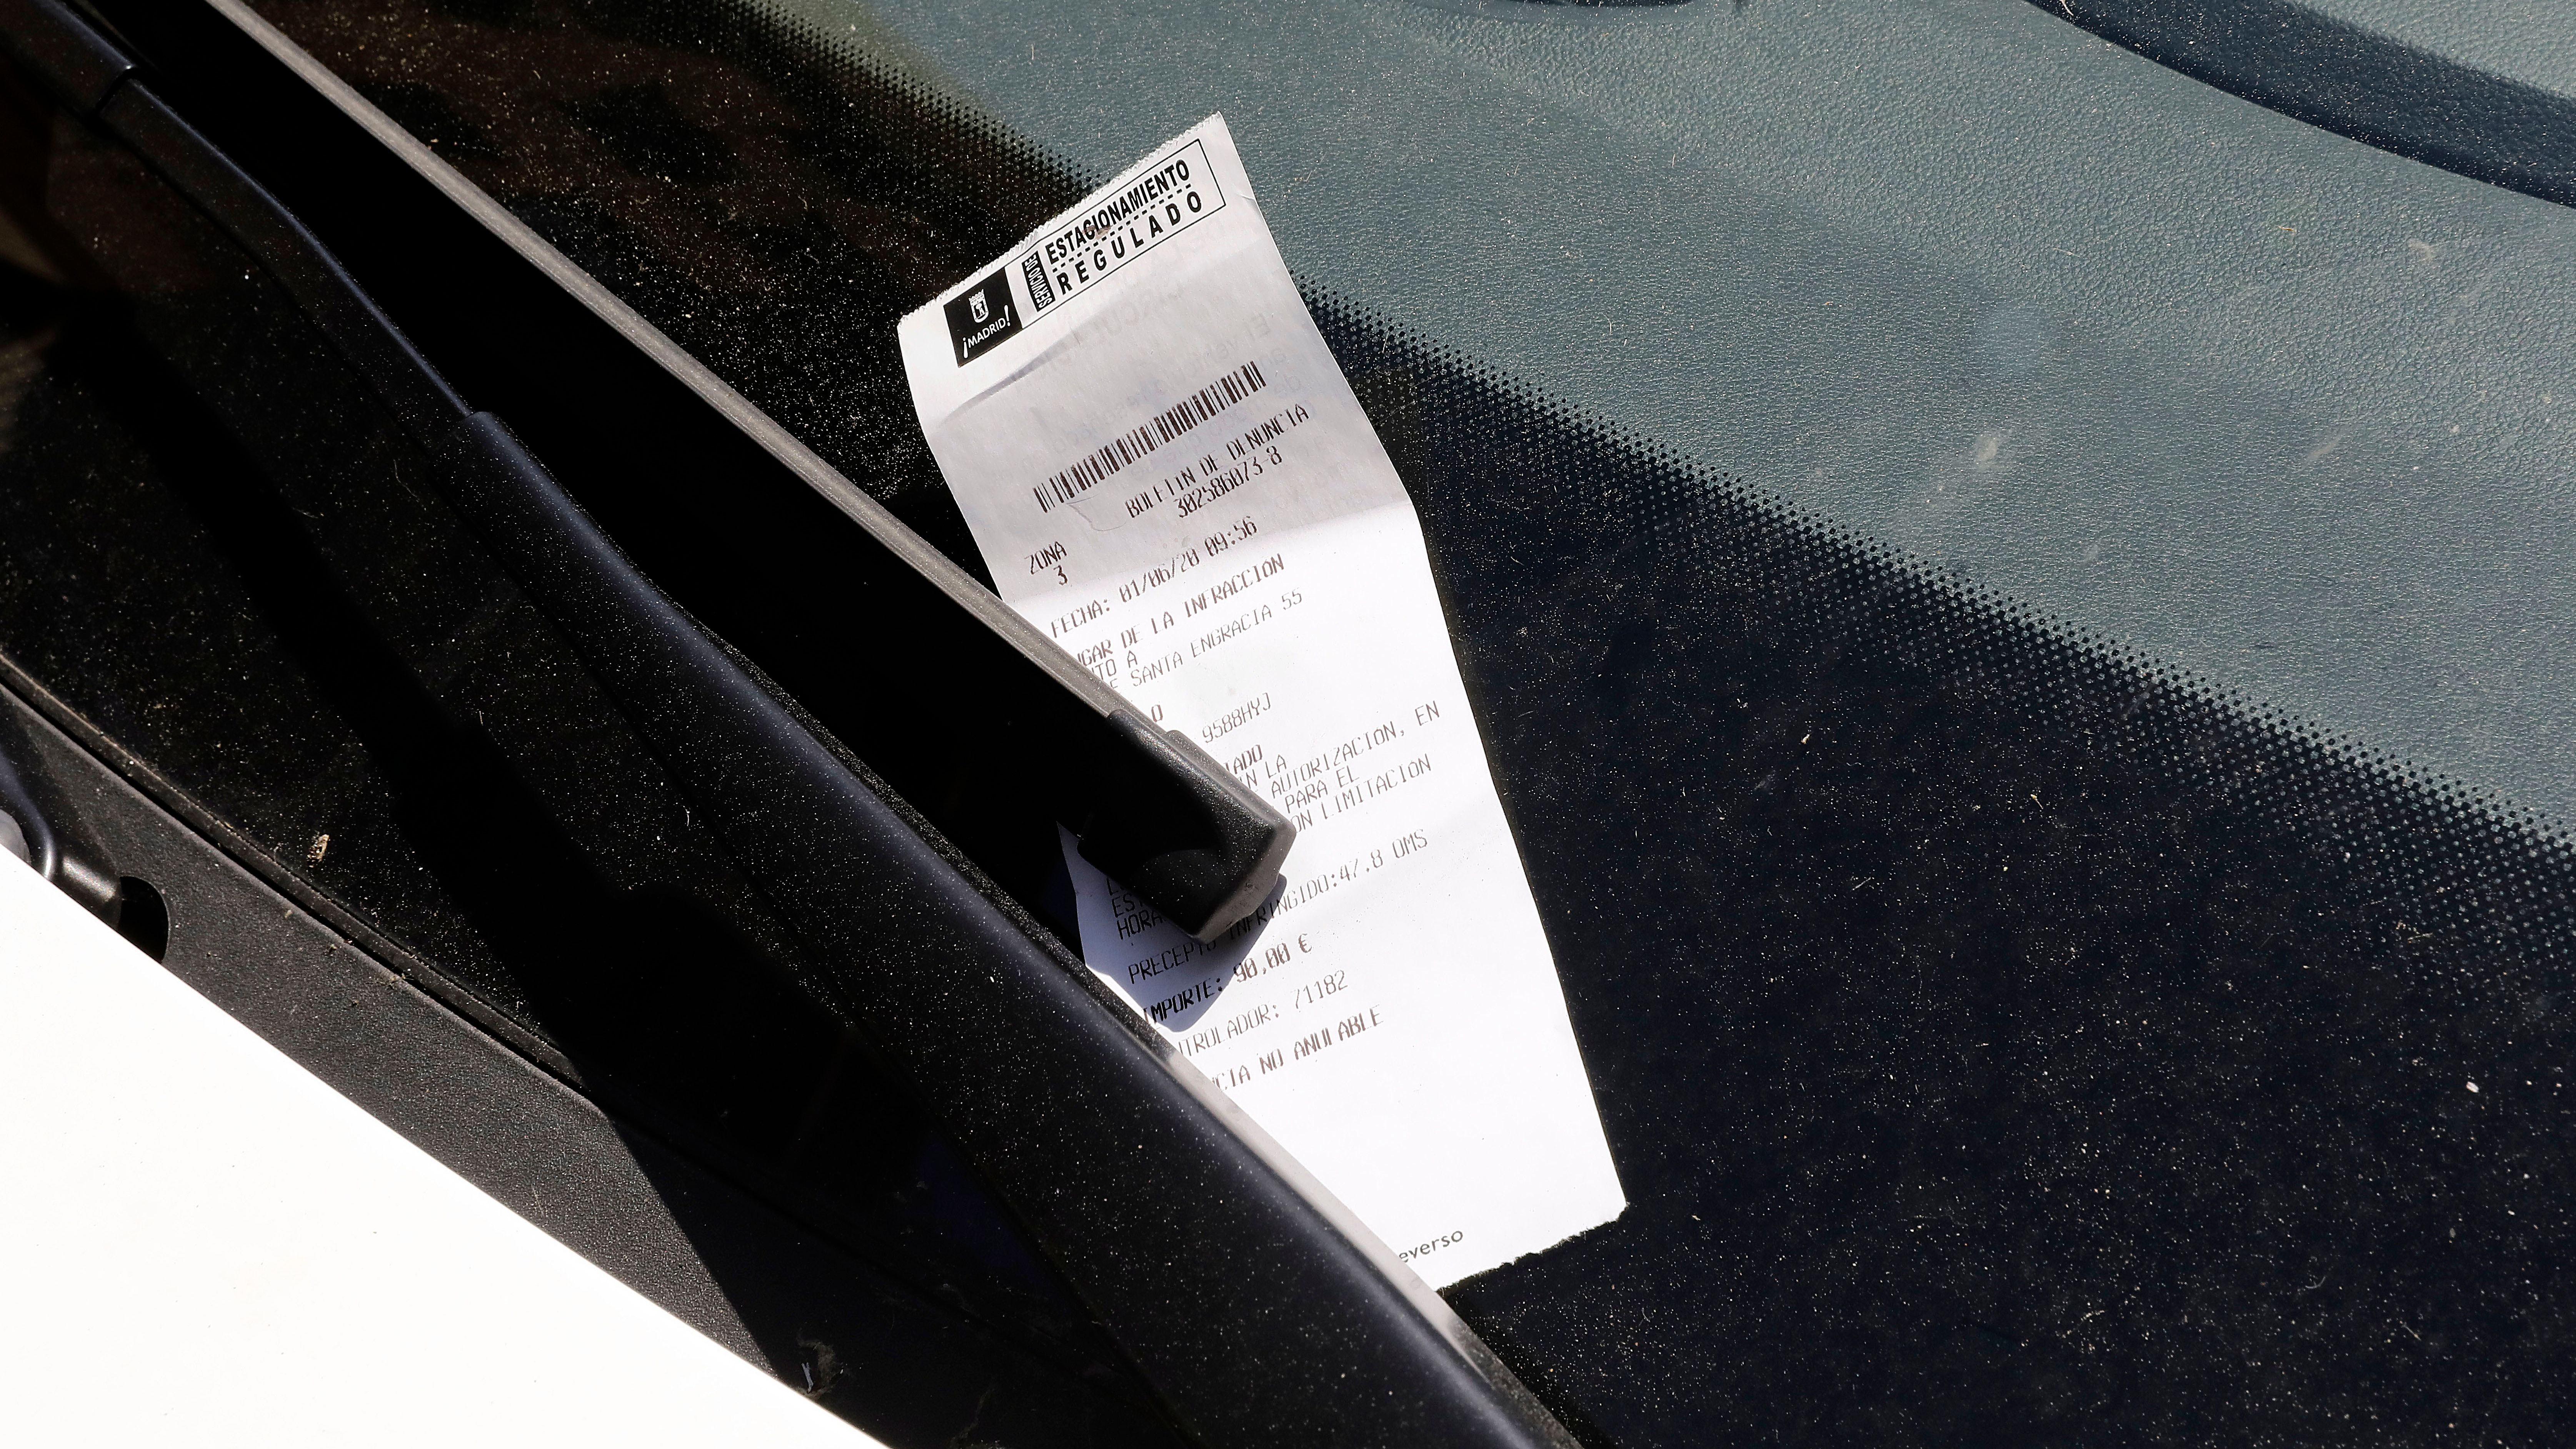 The Madrid City Council warns of false parking tickets positioned on the windshields of automobiles